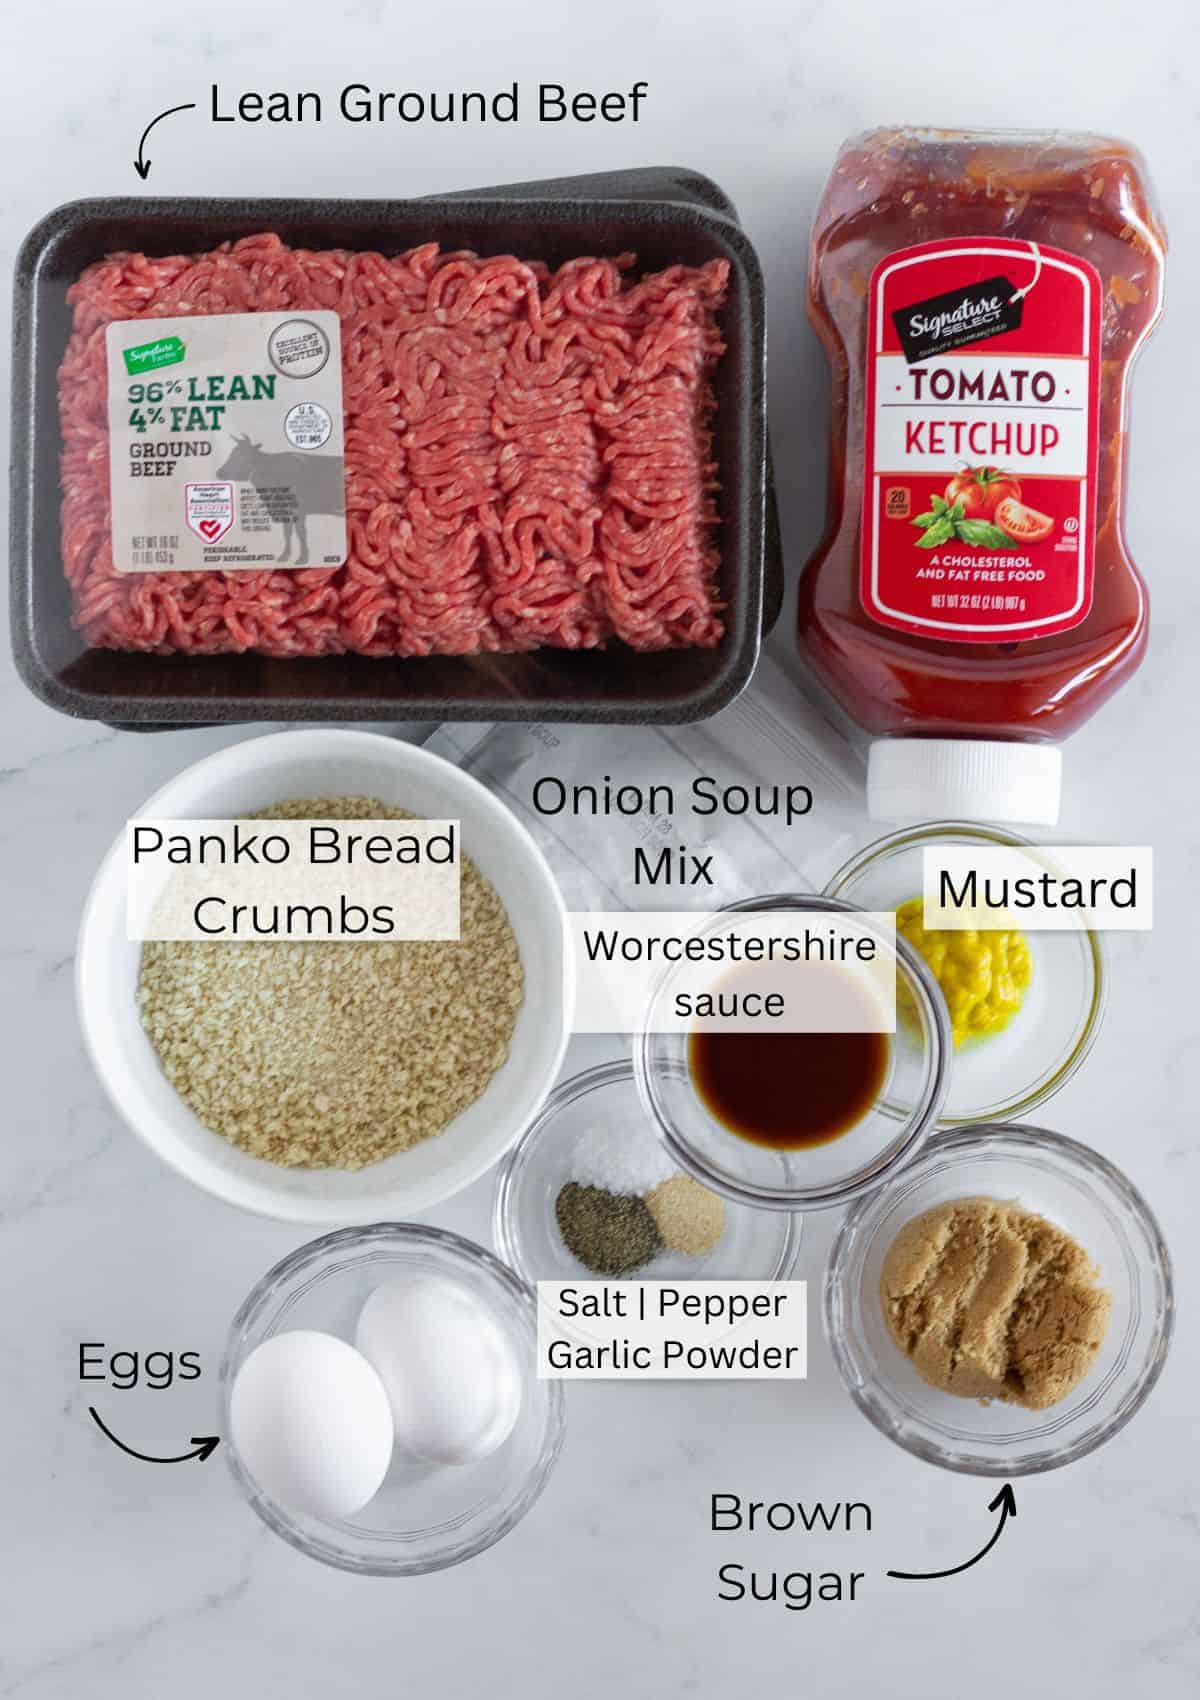 All of the ingredients needed to make a meatloaf in the crock pot.